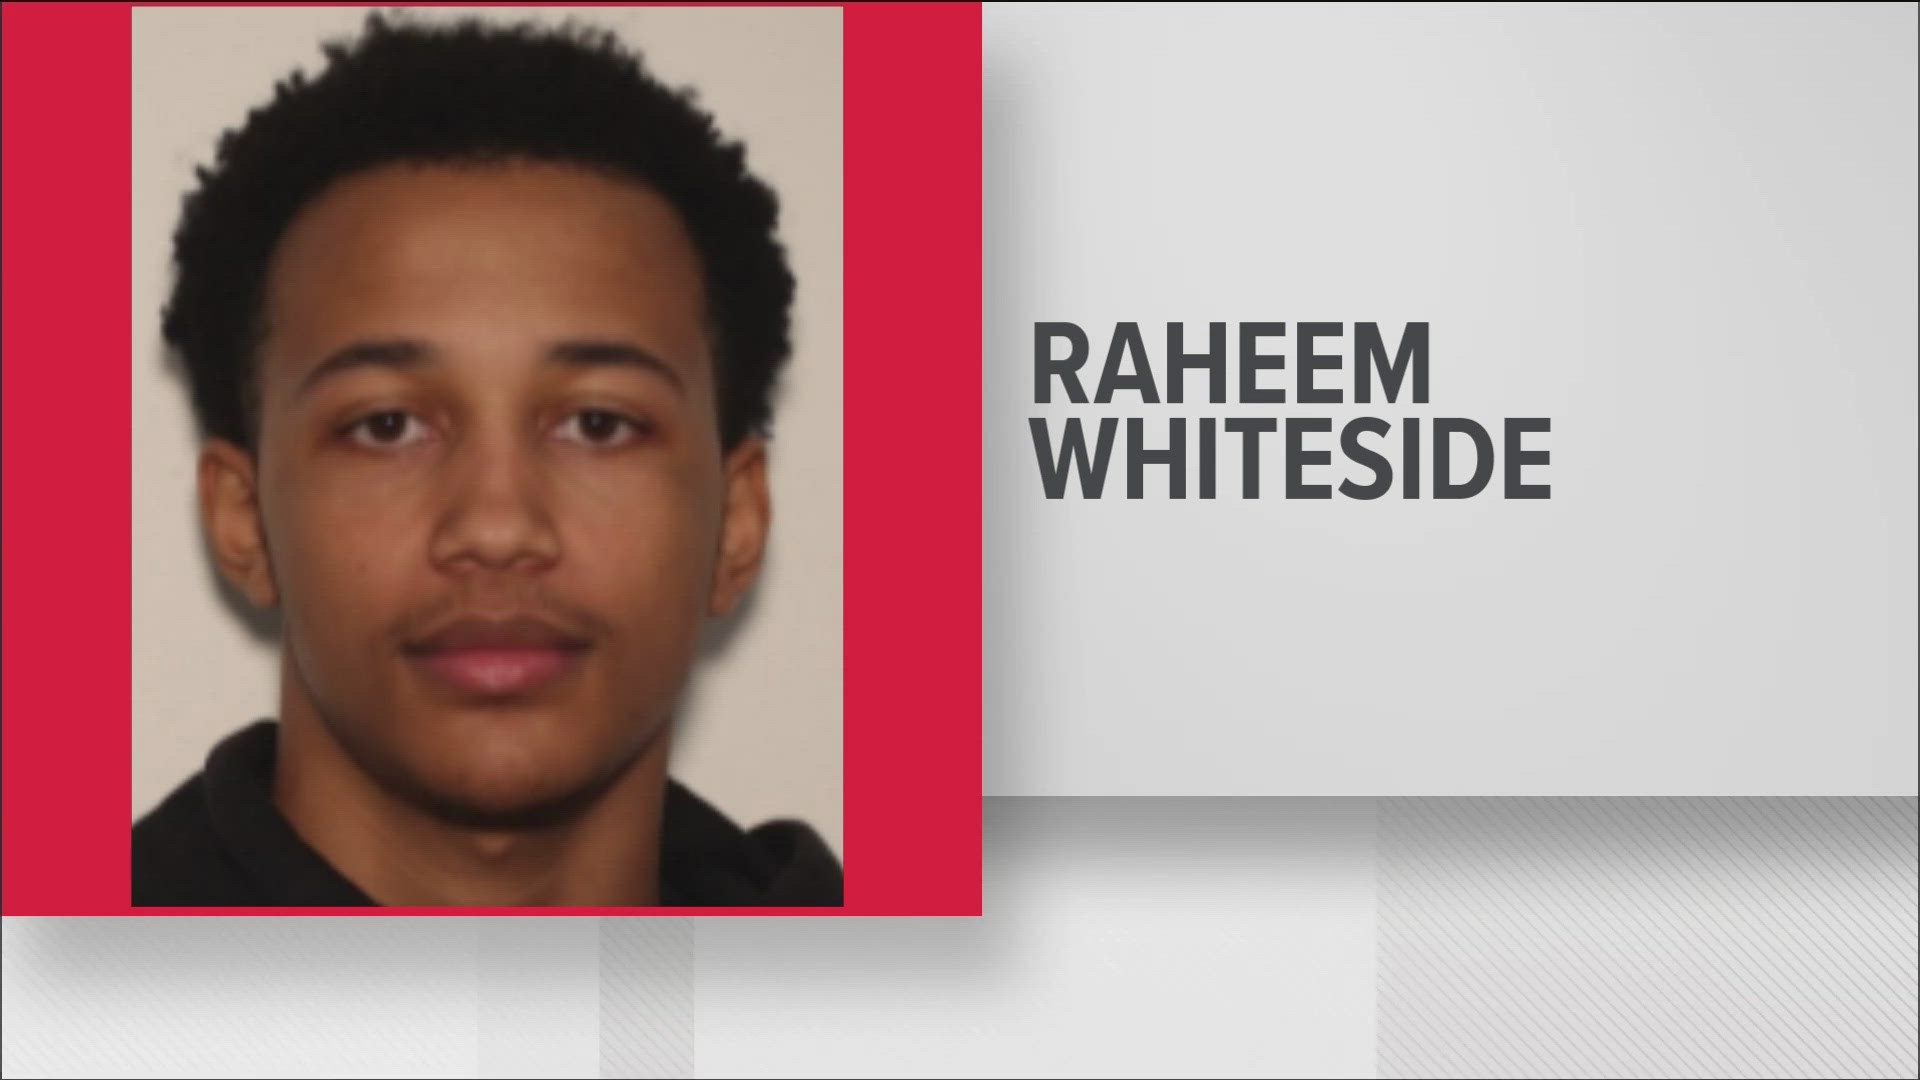 Police have identified Raheem Whiteside, 19, of Dacula, as the suspect in the case. His location is currently unknown, police said.